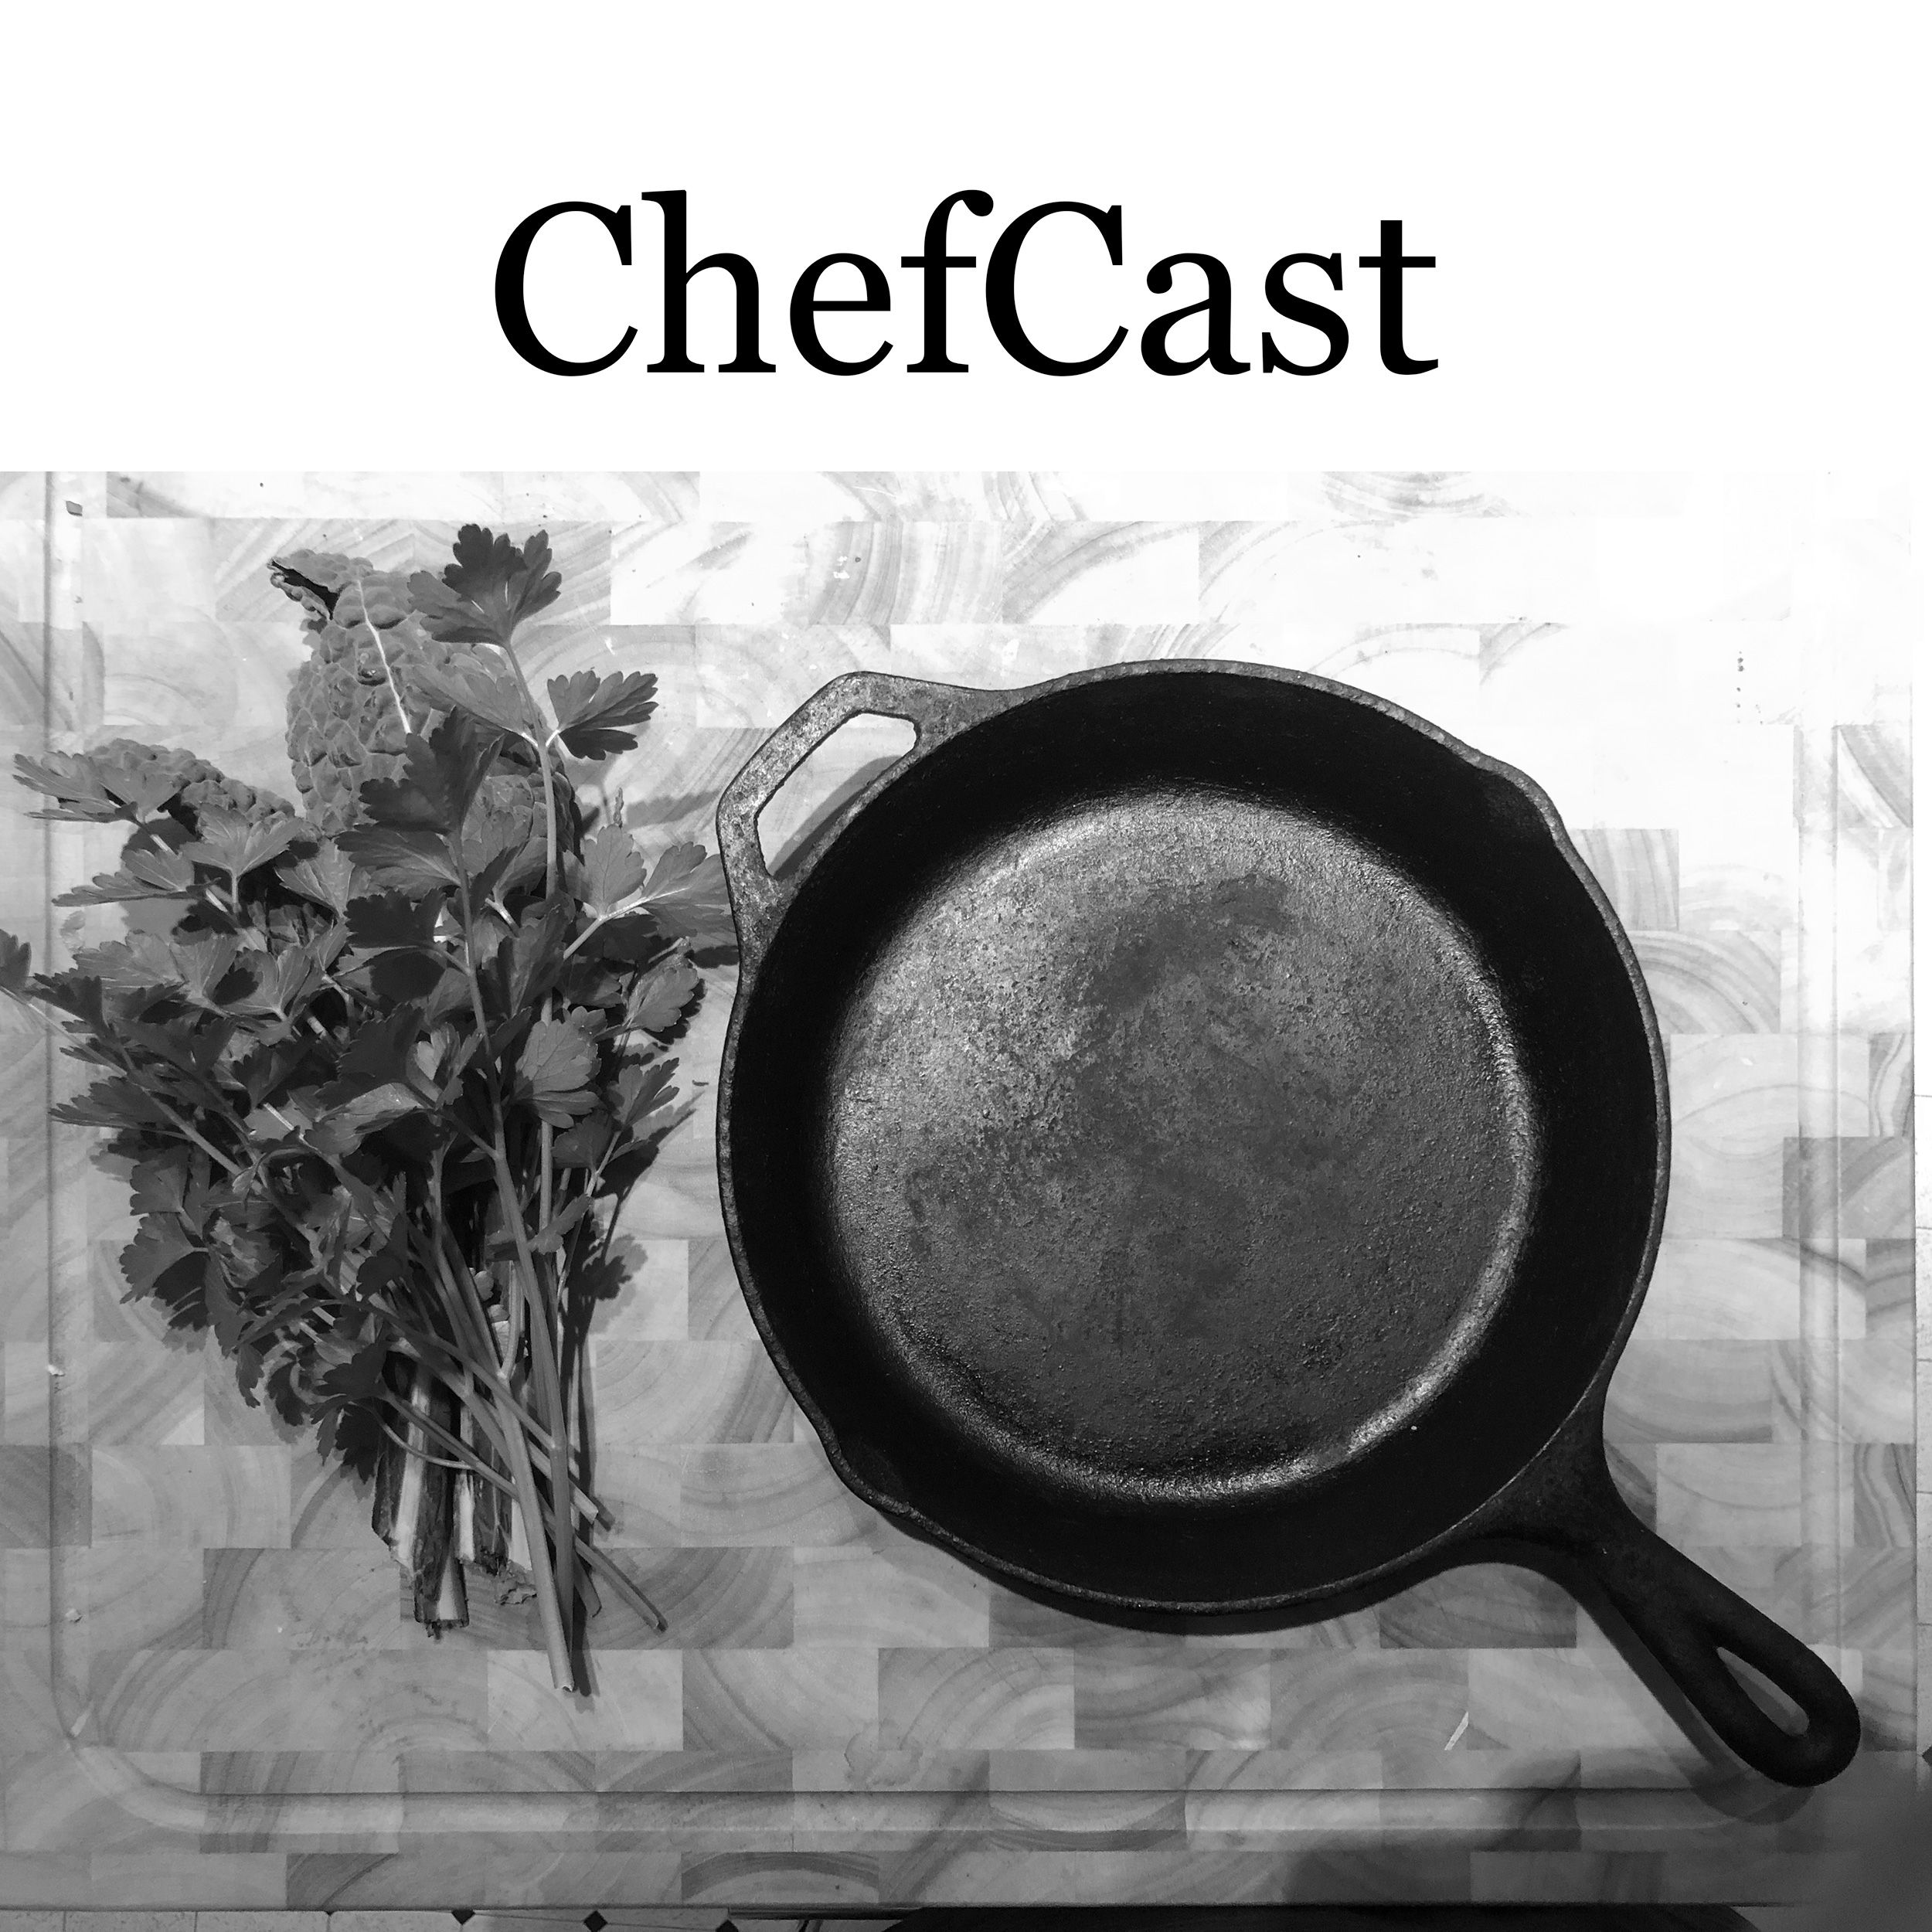 ChefCast